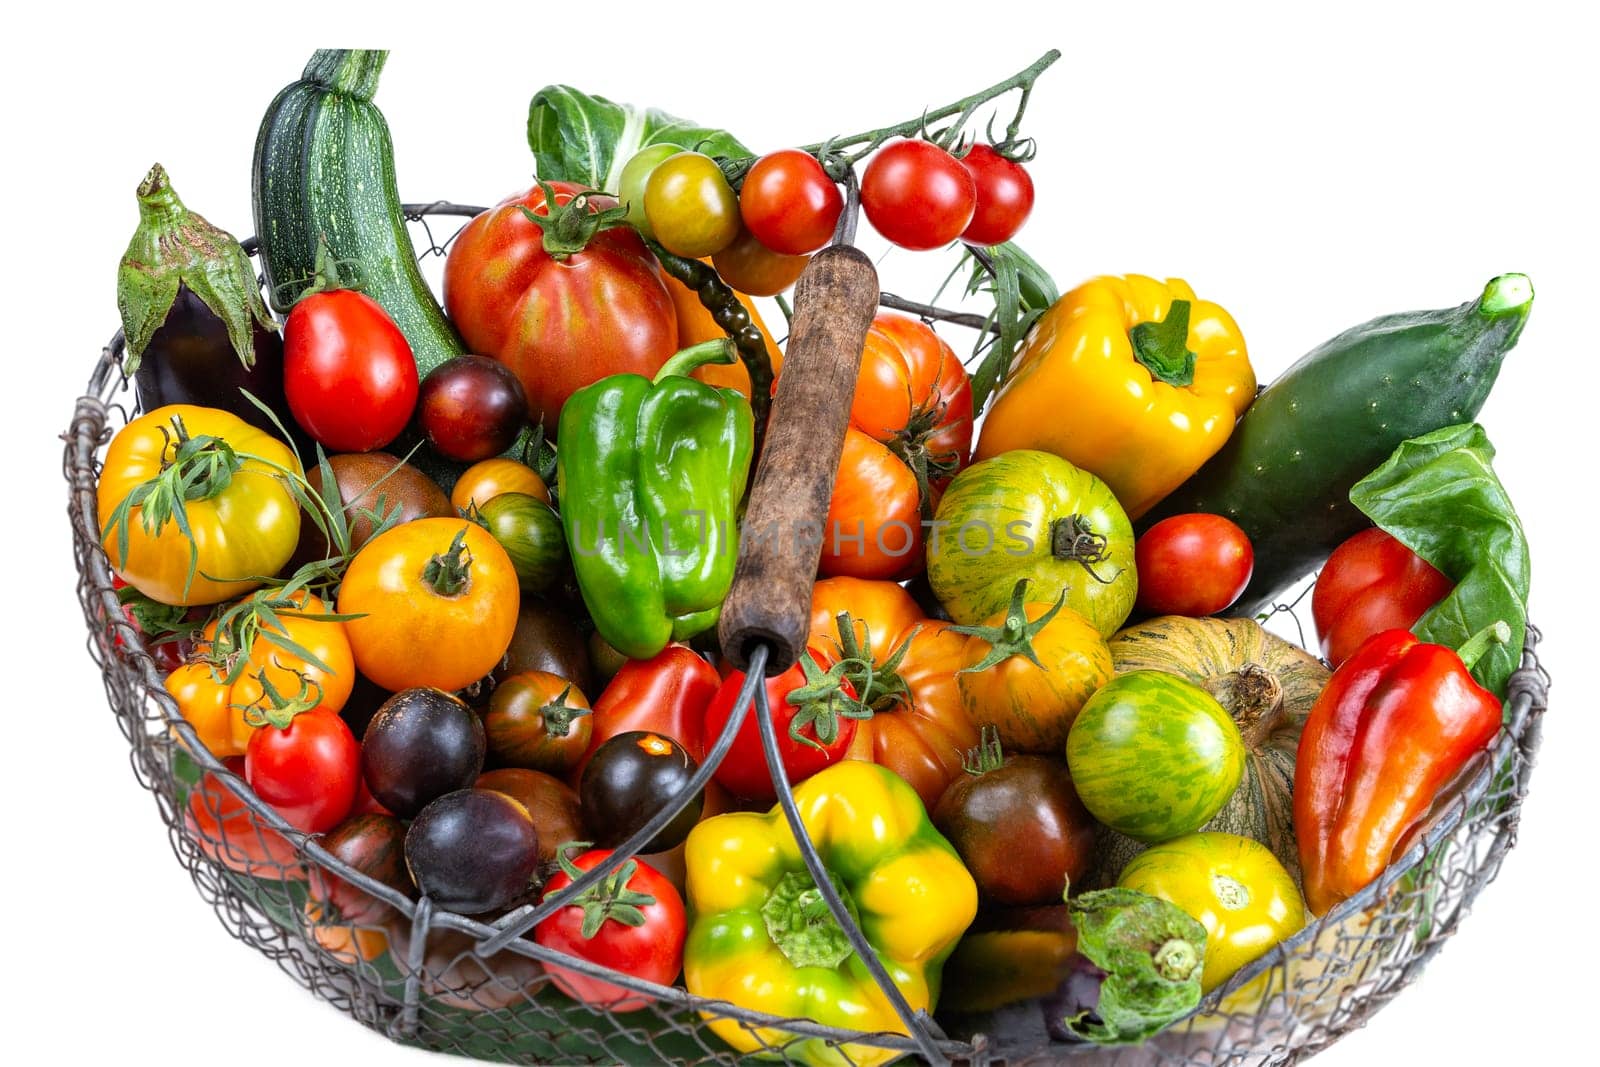 Basket with vegetables cabbage, carrots, cucumbers,butternuts tomatoes, radish ,zuchini and peppers white background ,Concept of biological, bio products, bio ecology, grown by yourself, vegetarians. by JPC-PROD